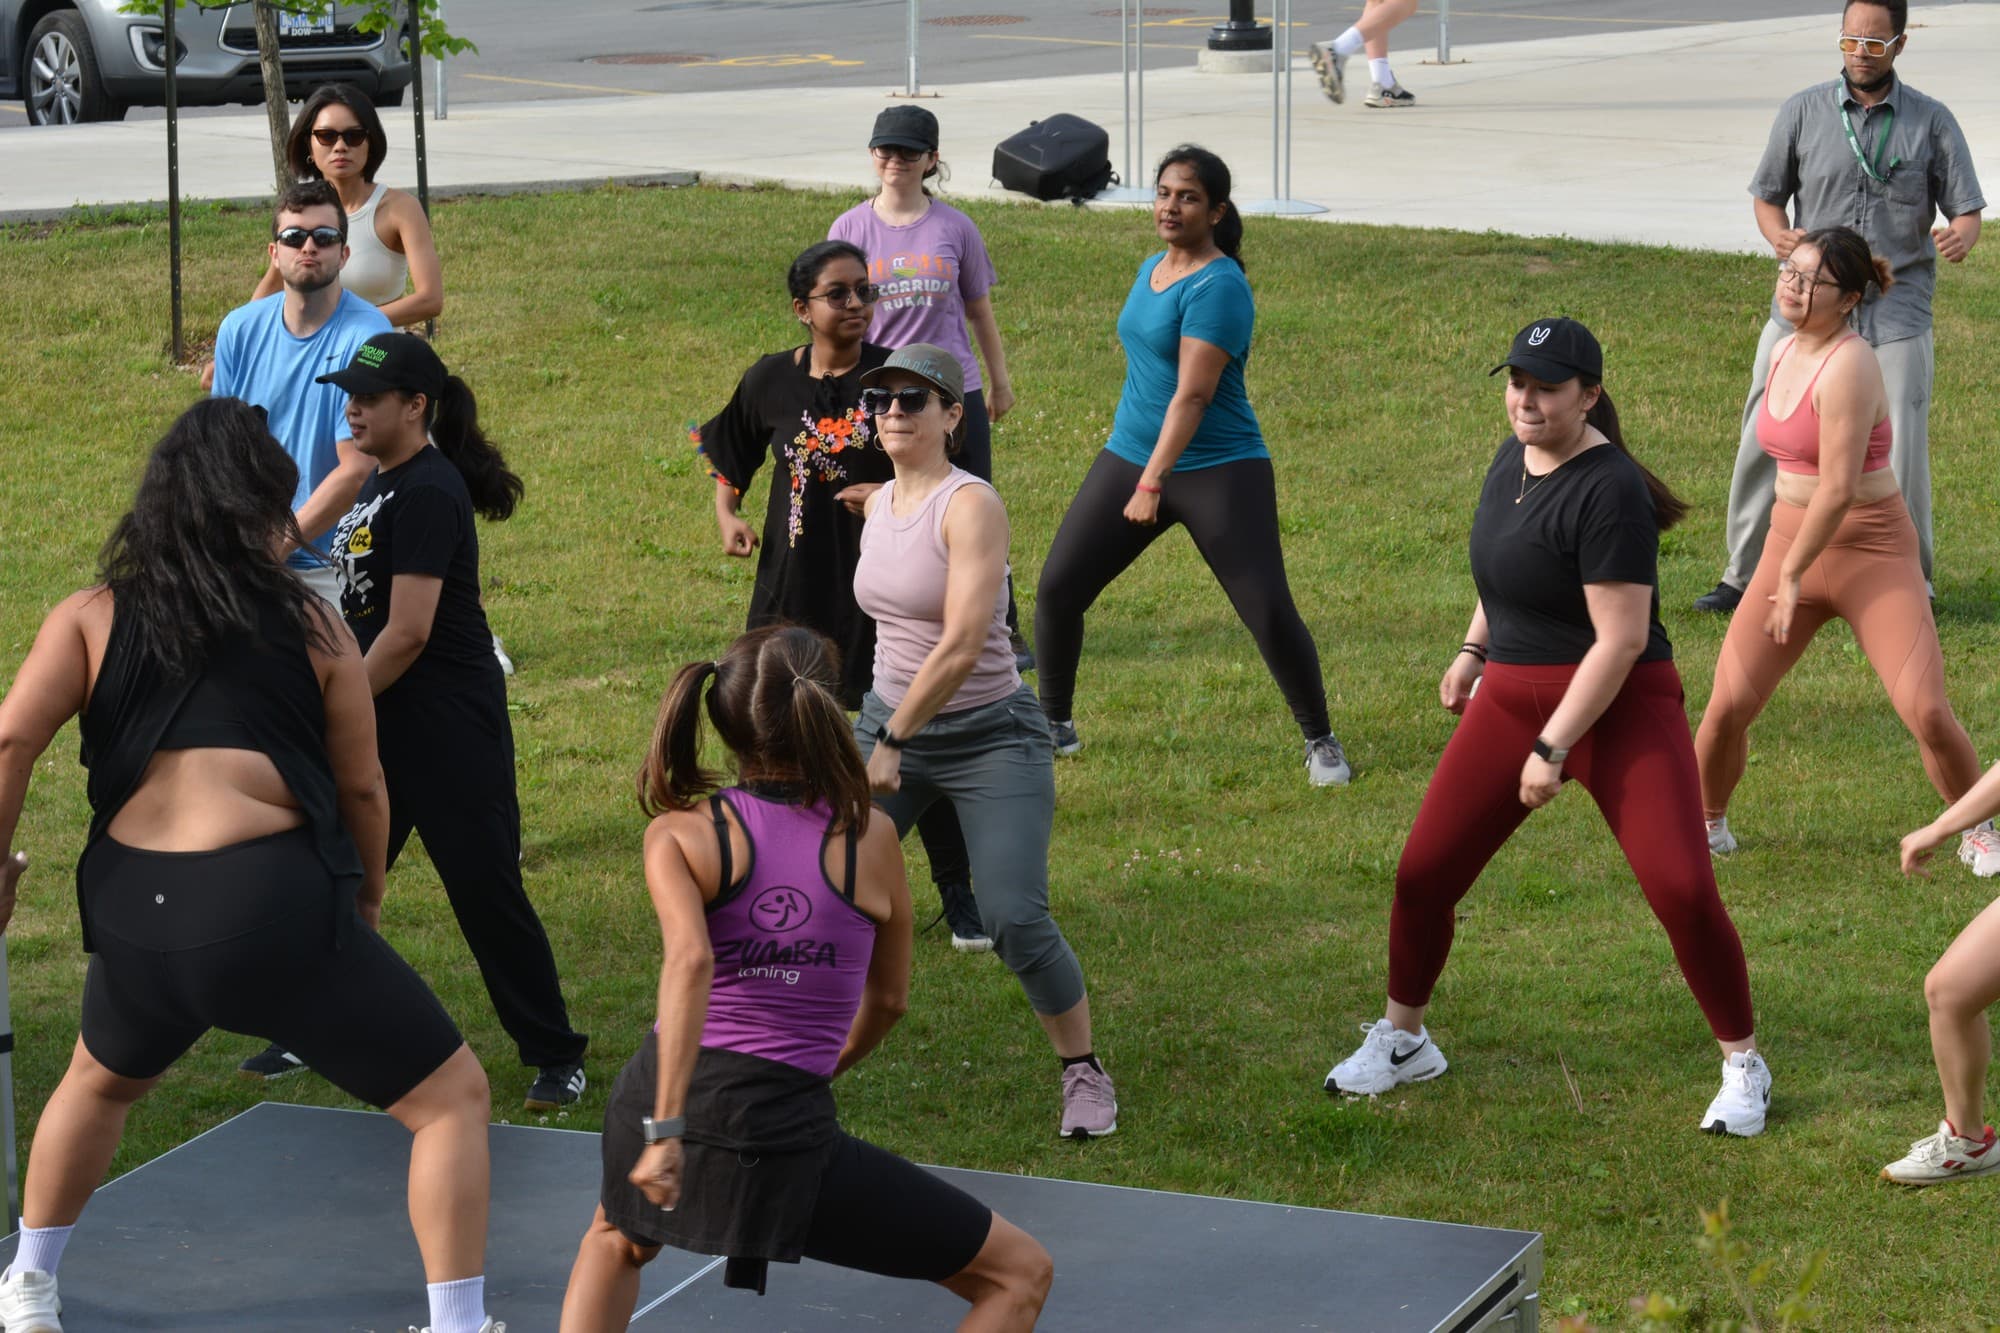 Zumba on the lawn participants getting their heart beats up